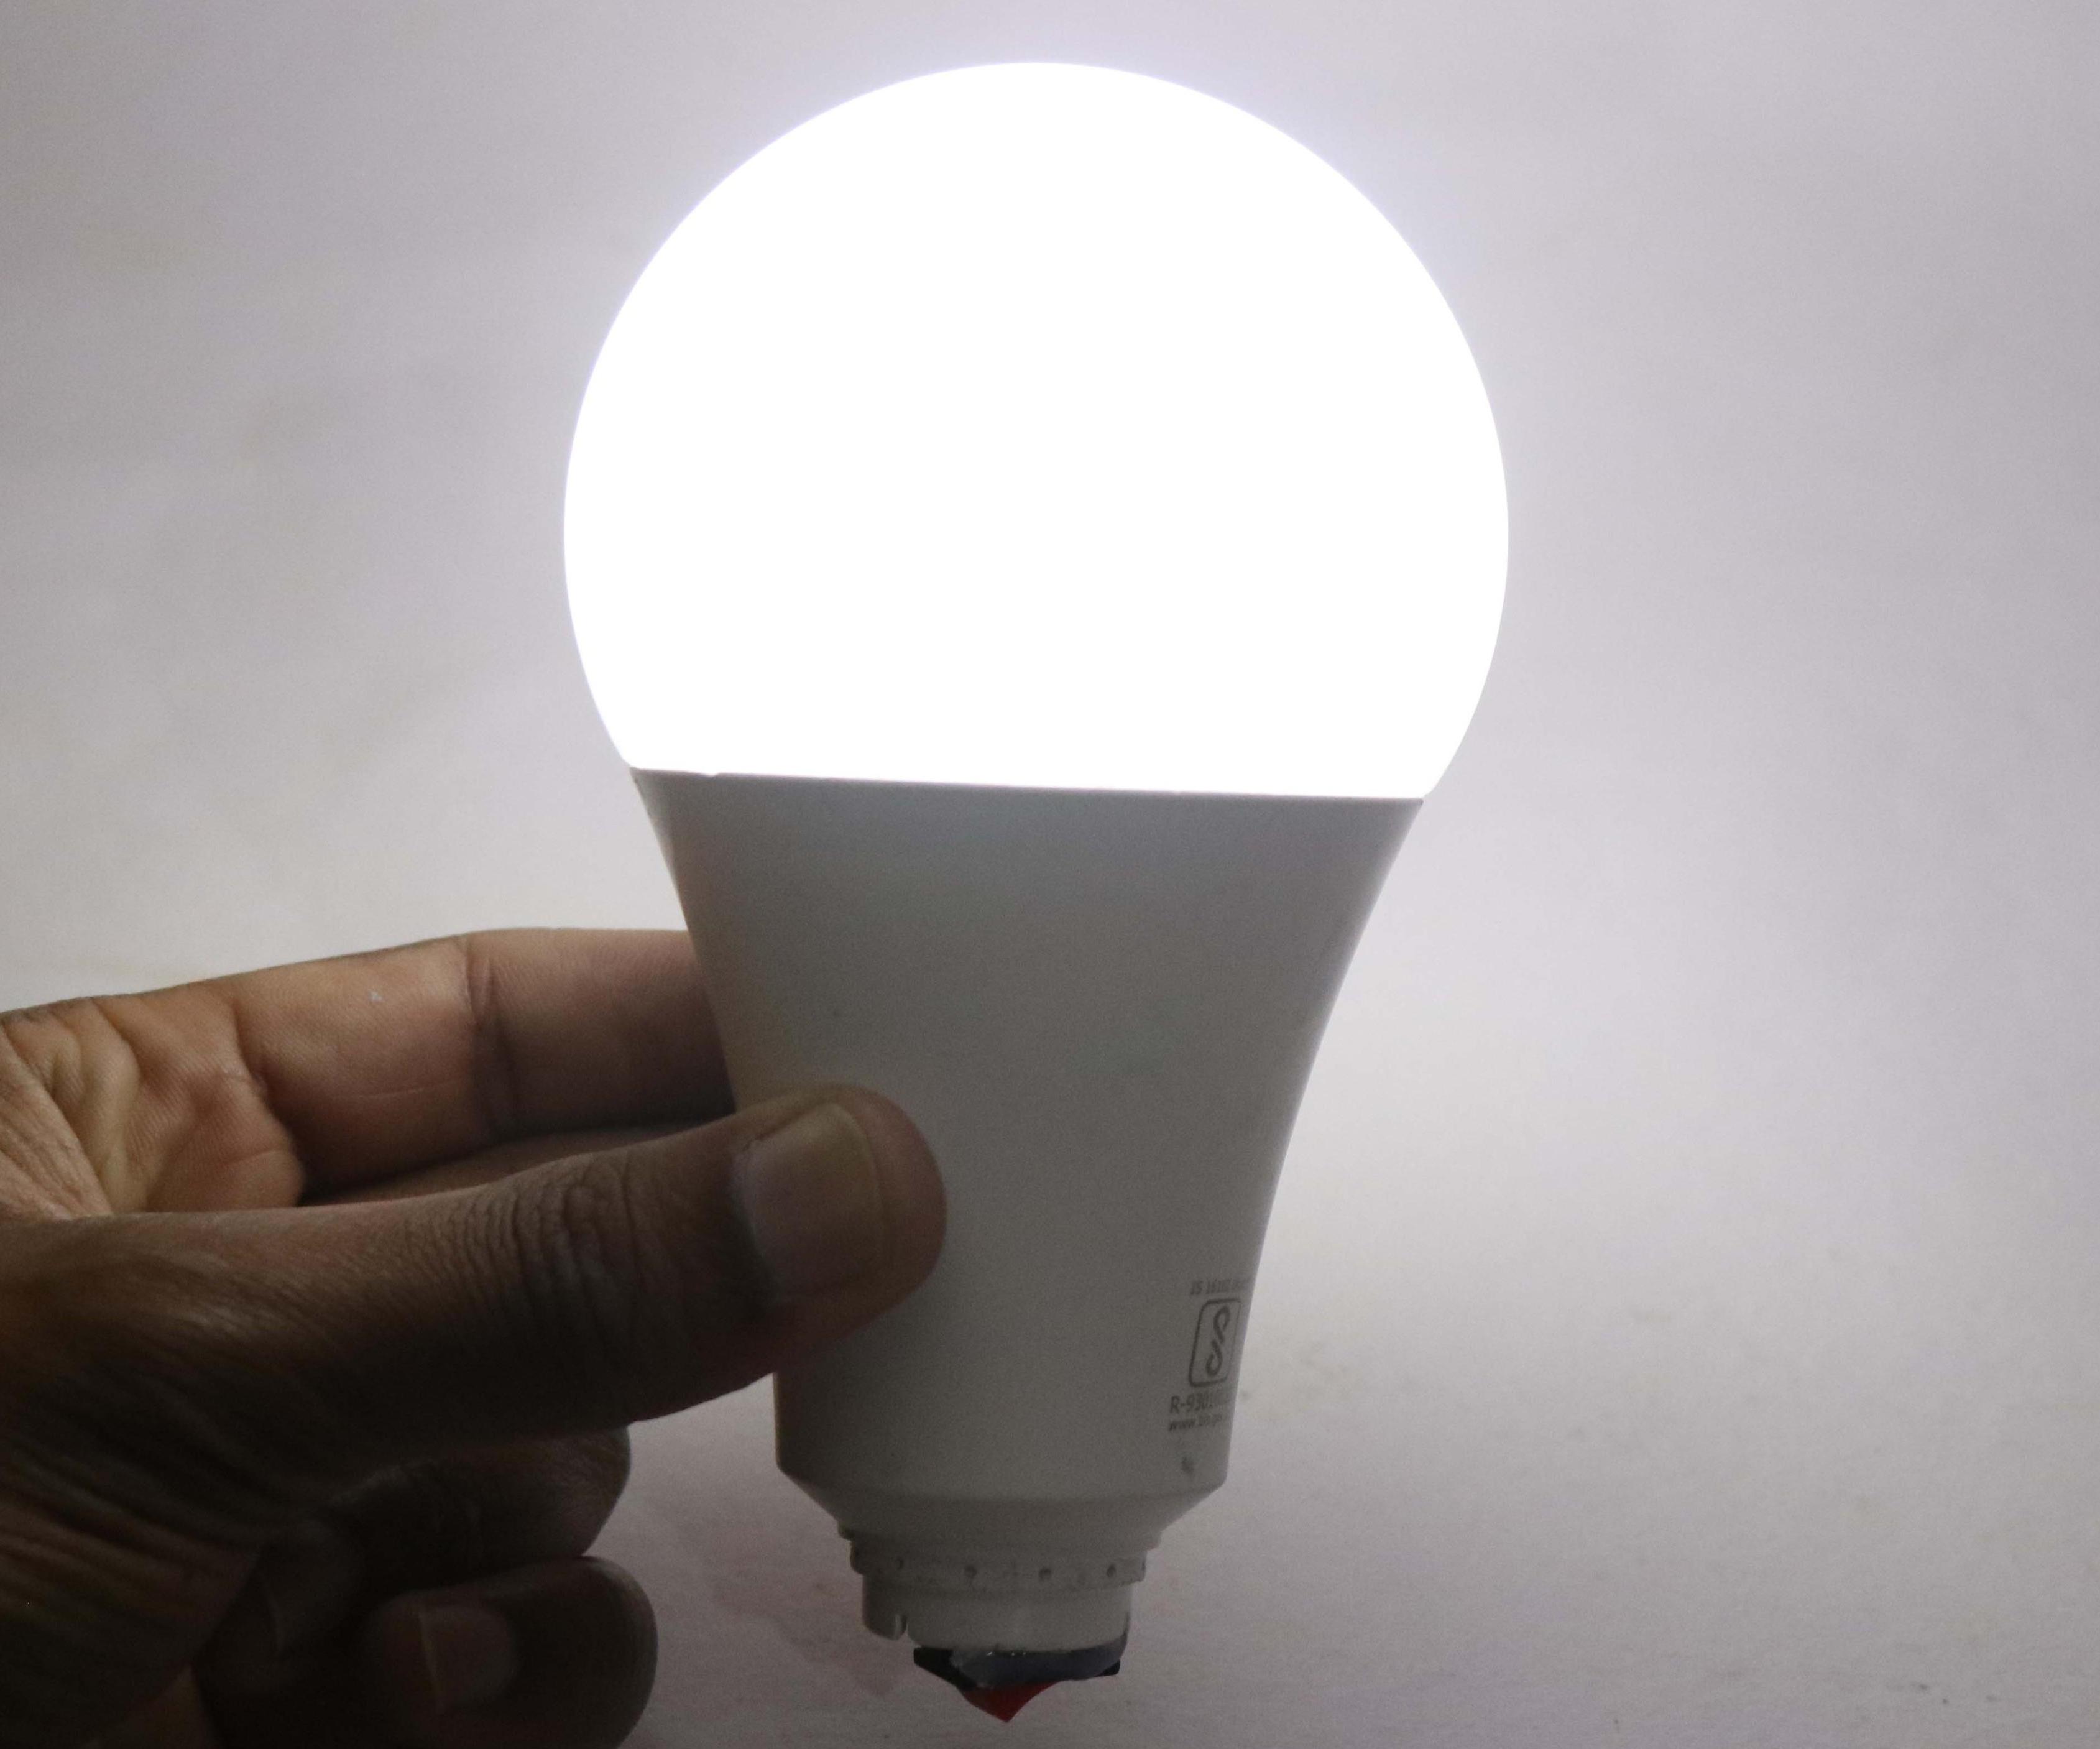 Giving LED Bulbs a Second Chance